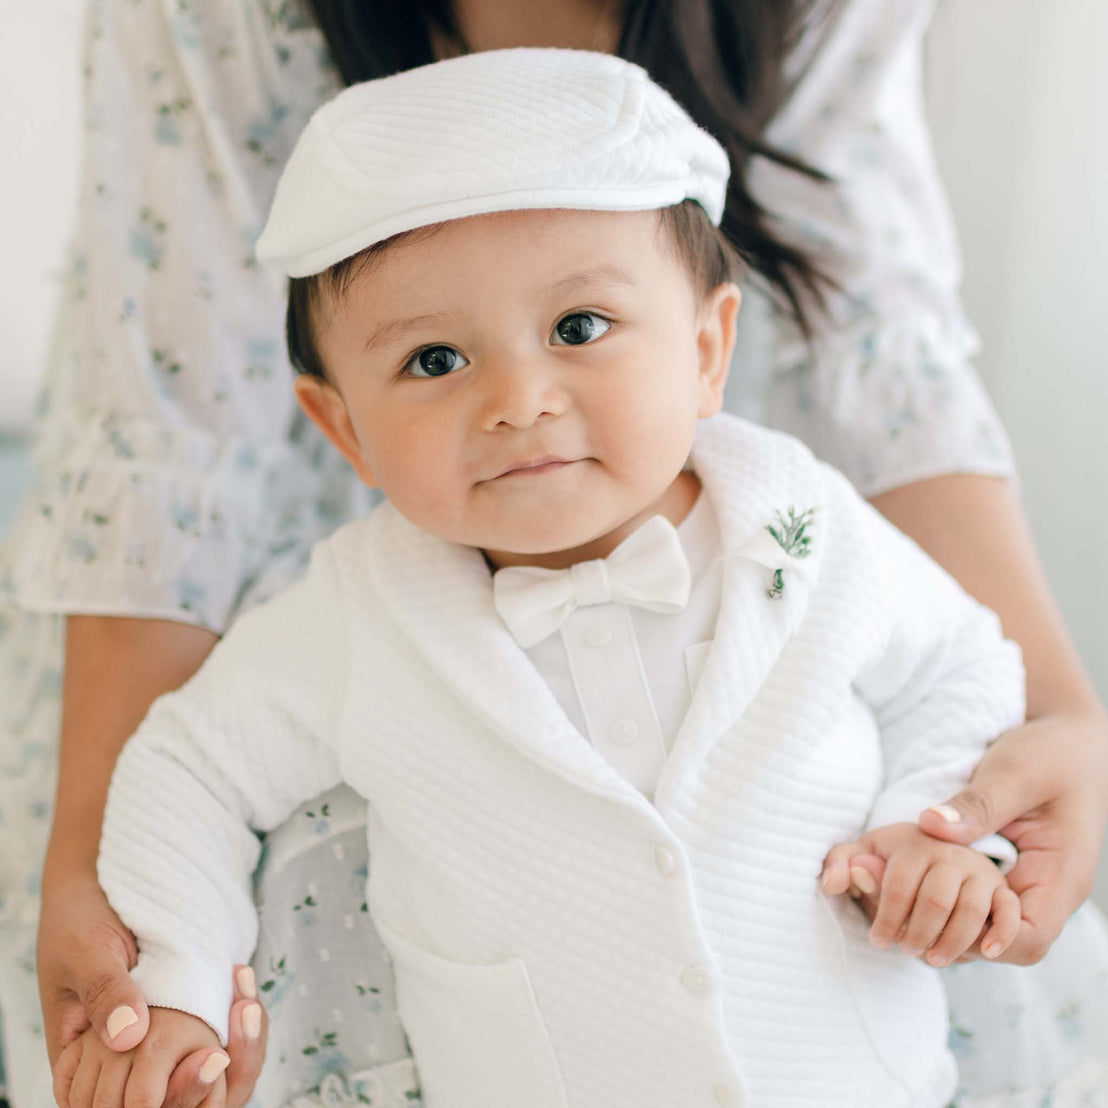 A baby boy dressed in the Elijah 3-Piece Set, which includes a white christening suit with a bow tie and cap, is standing while holding the hands of an adult behind him. The baby is looking at the camera with a neutral expression. The adult's body is partially visible, dressed in a light, textured cotton garment.